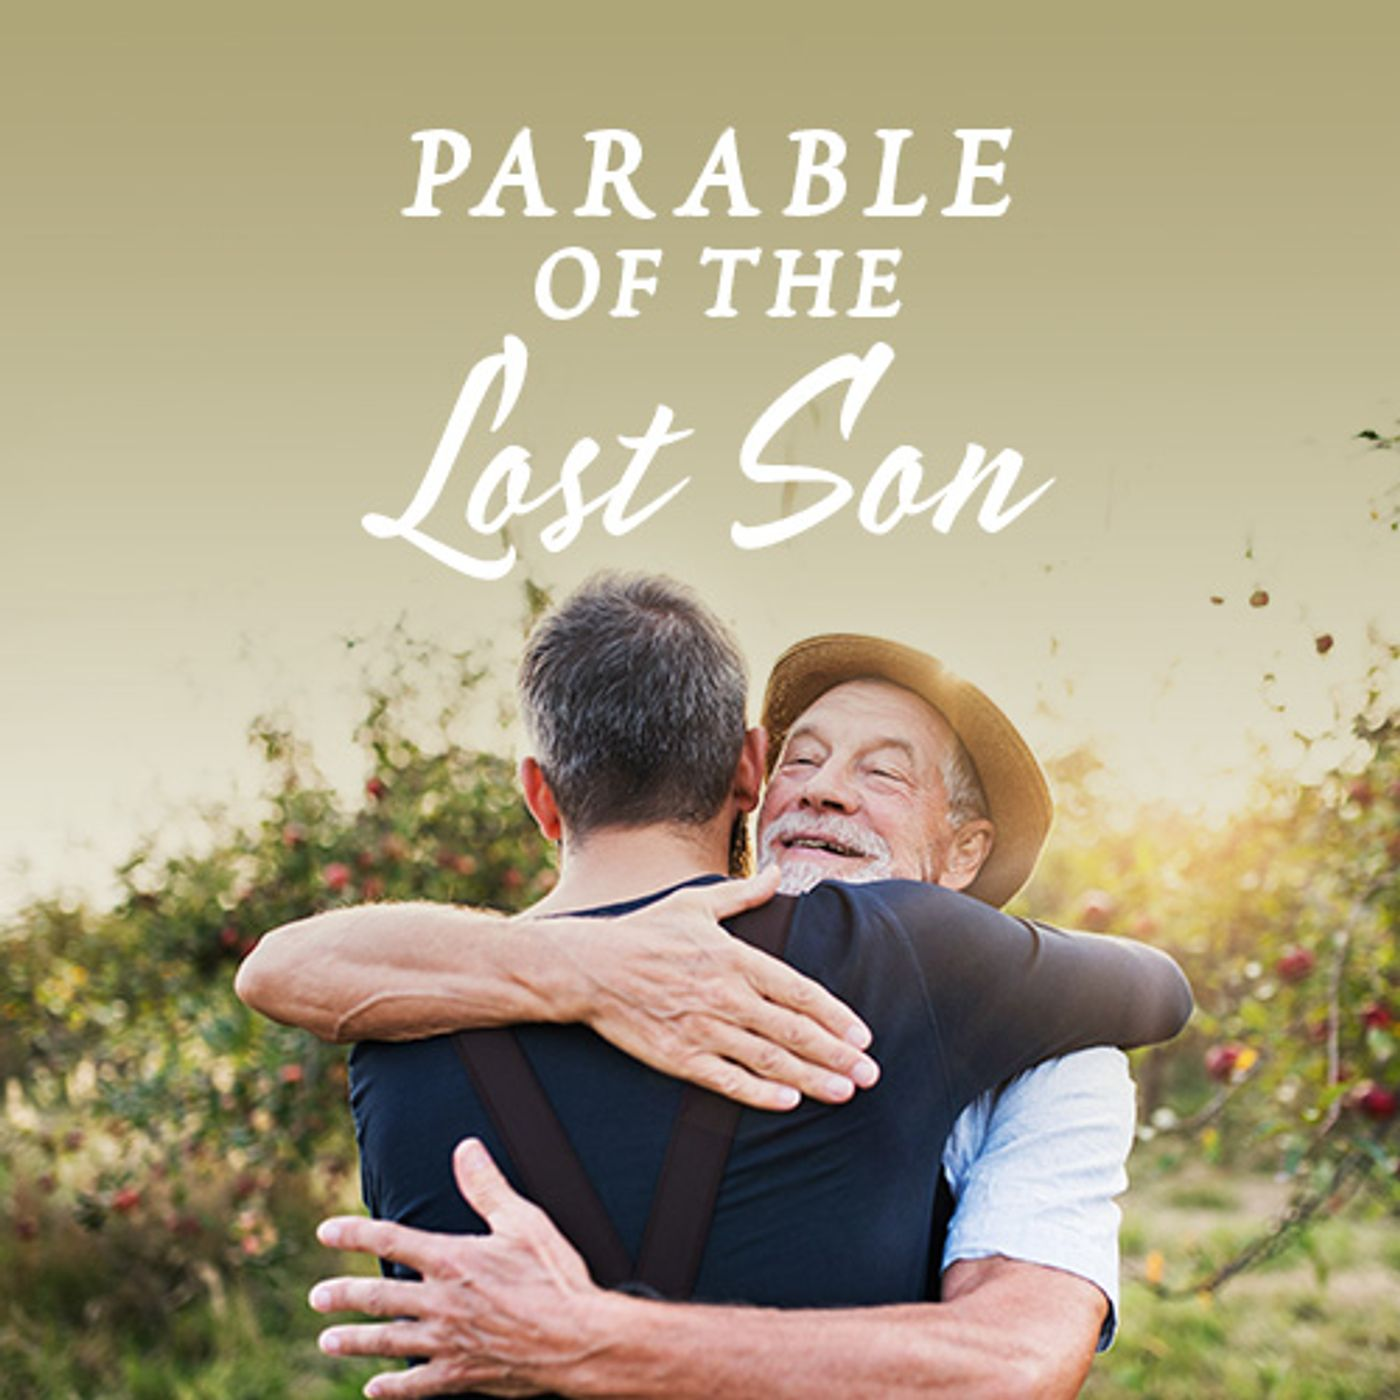 Parable of the Lost Son